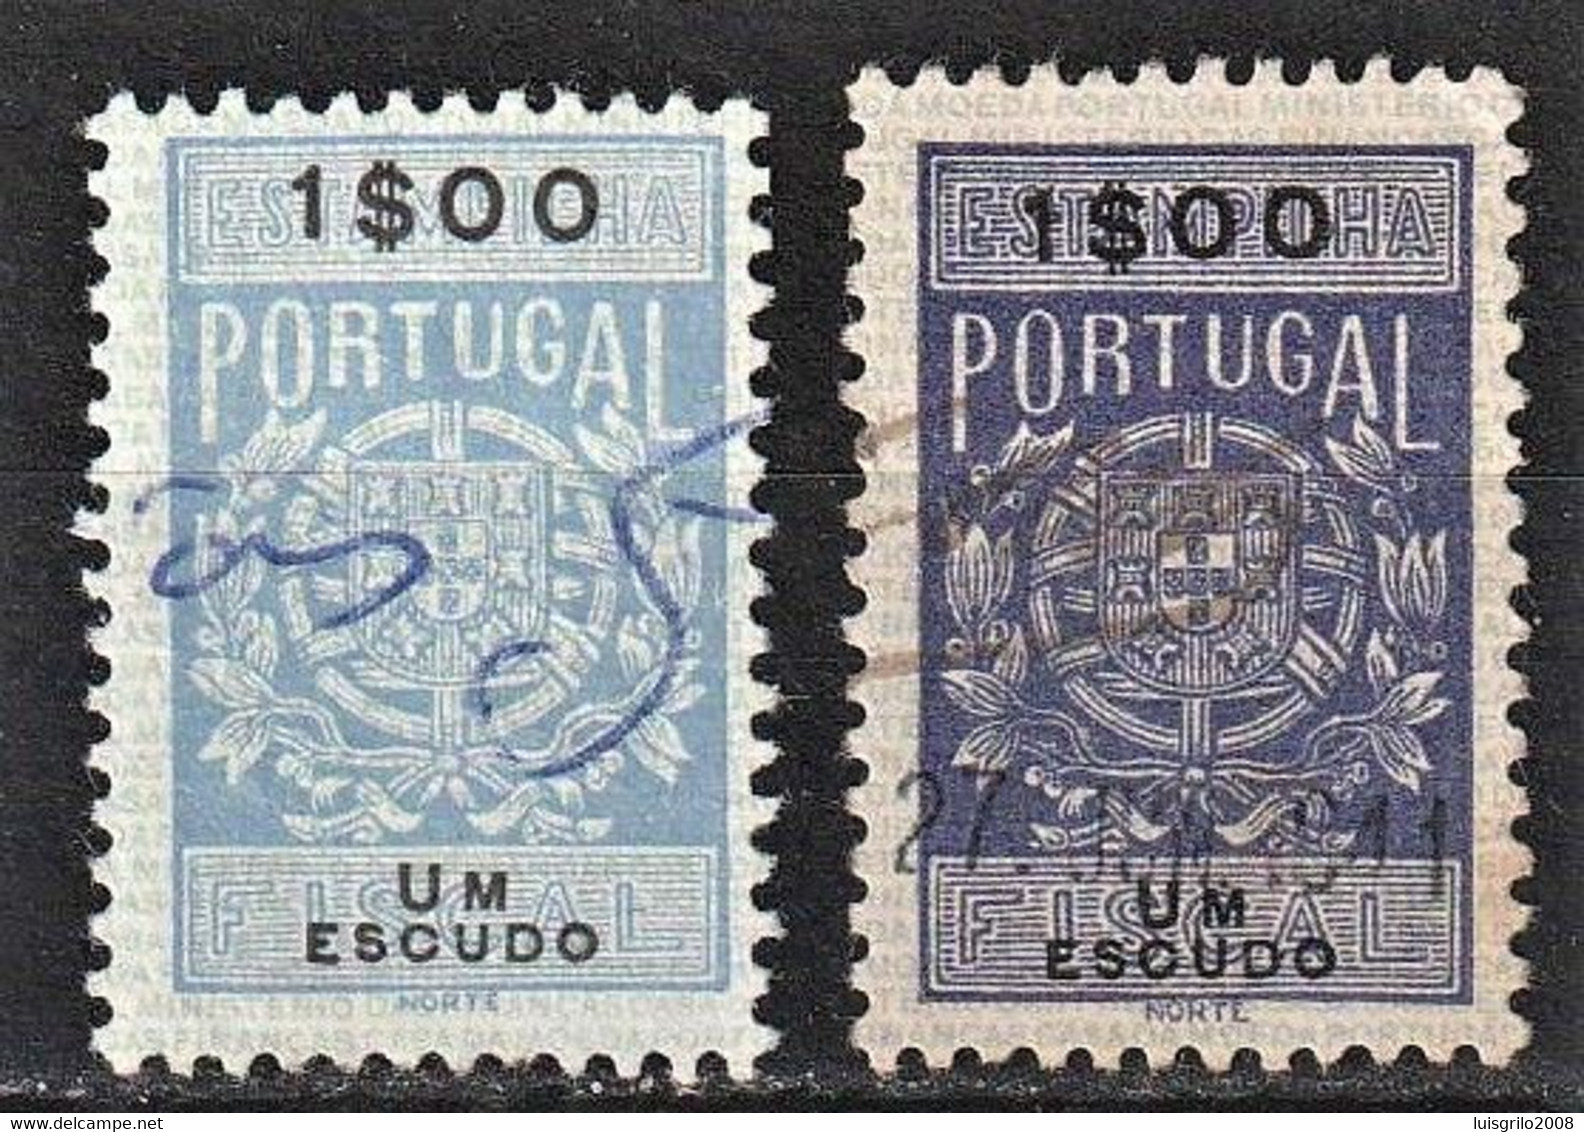 VERY RARE STAMP - Fiscal/ Revenue, Portugal 1940 - Estampilha Fiscal -|- 1$00 - DIFFERENT COLOR - Used Stamps